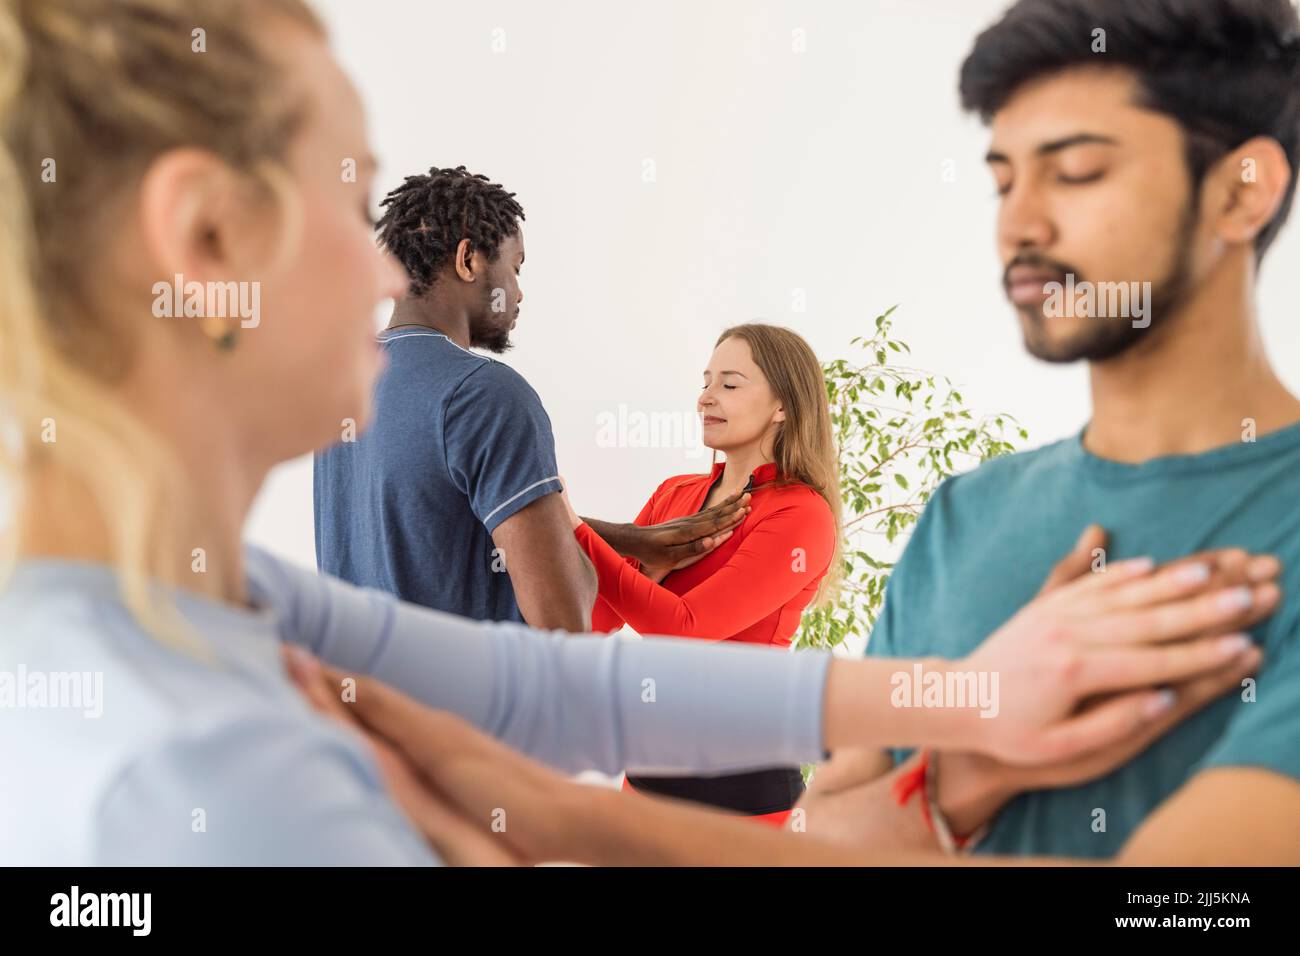 Couples with eyes closed touching chest of each other practicing yoga in class Stock Photo